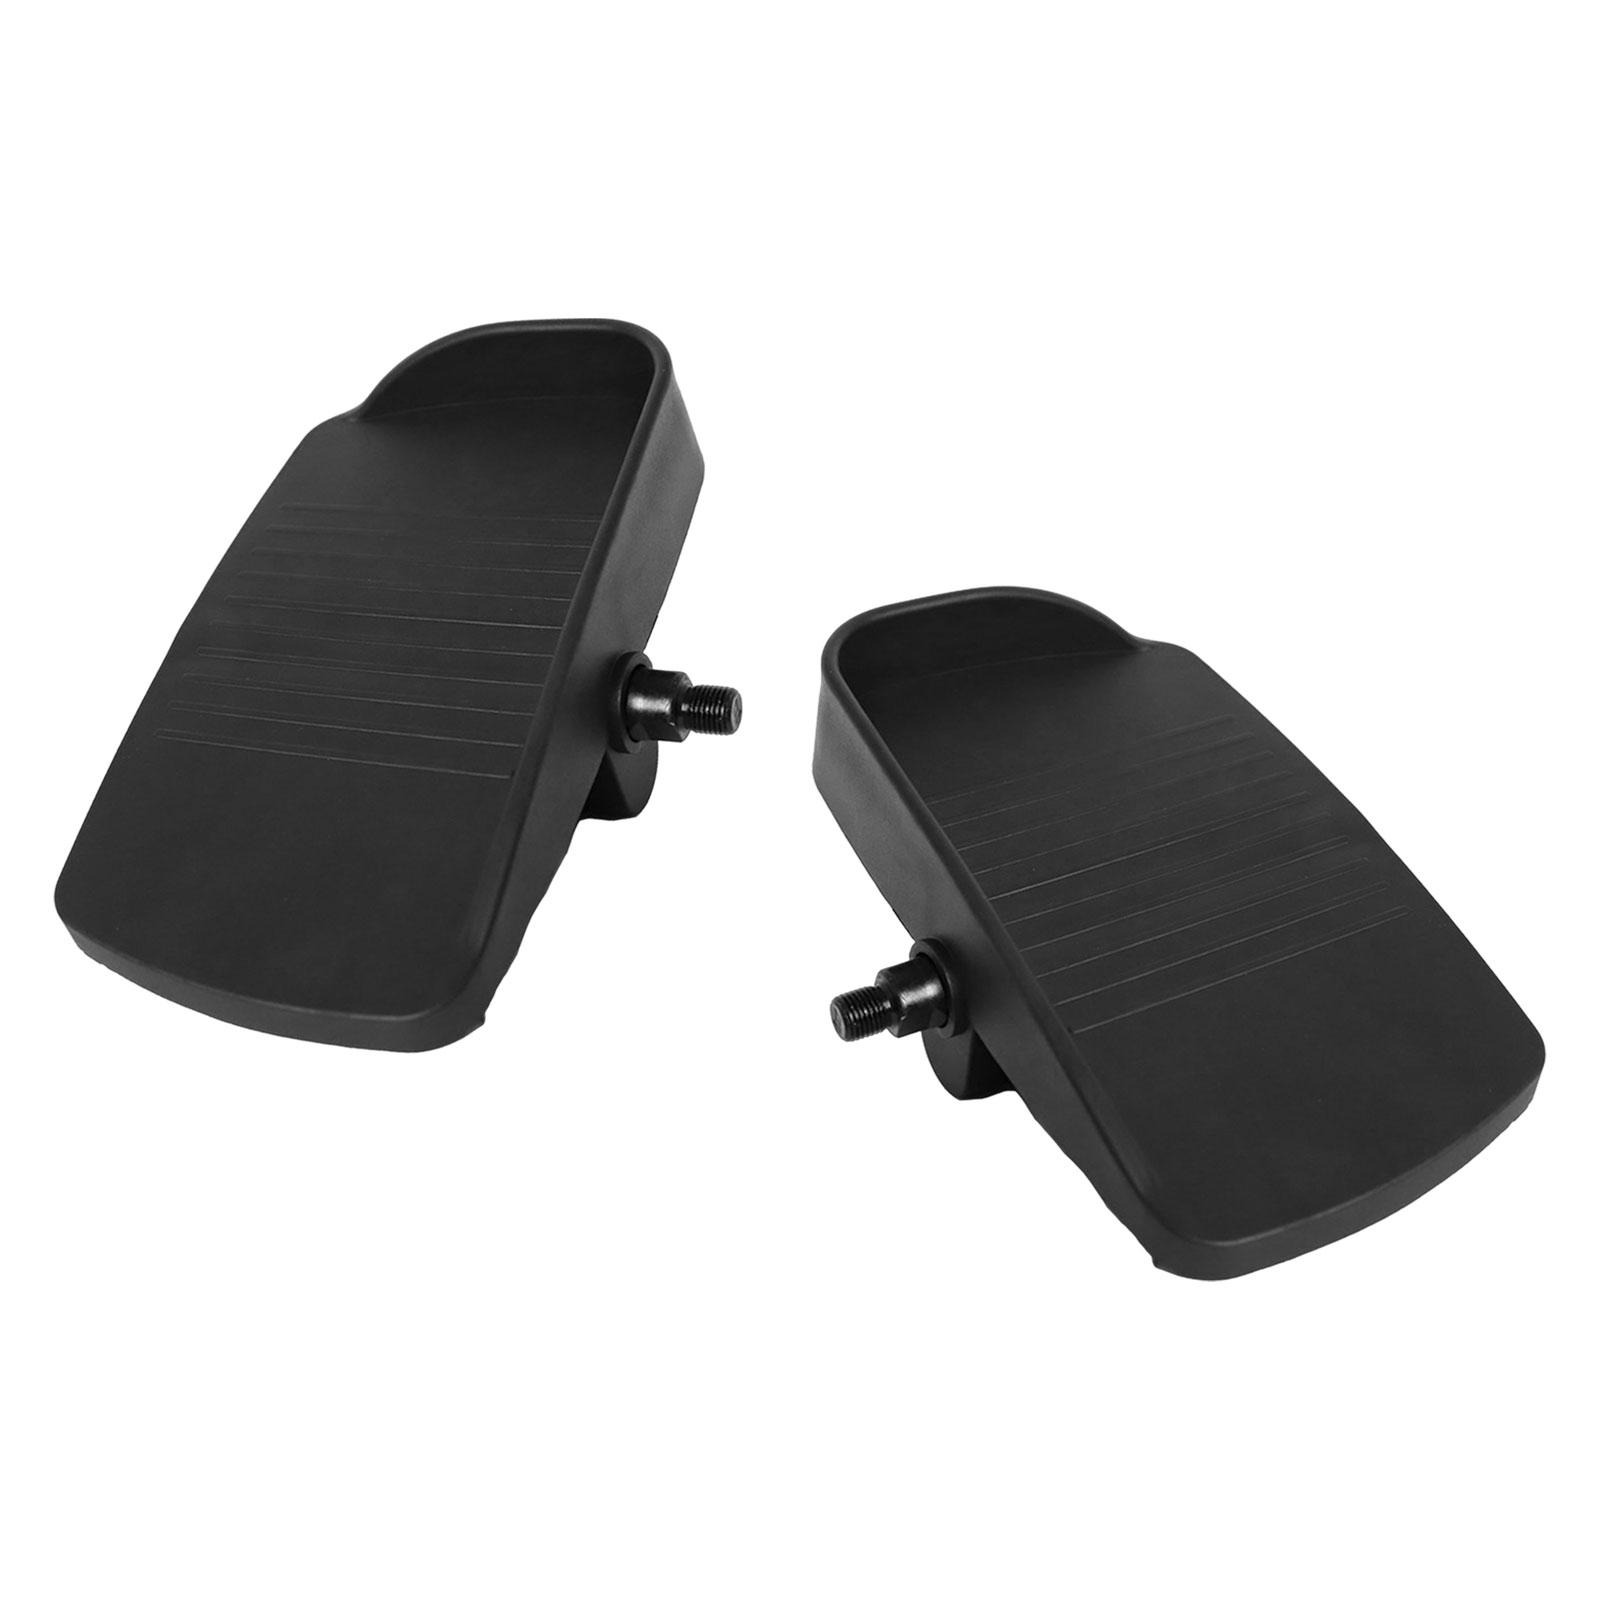 2x Exercise Bike Pedals Stair Stepper Pedal Elliptical Machine Foot Pedals for Elliptical Machine